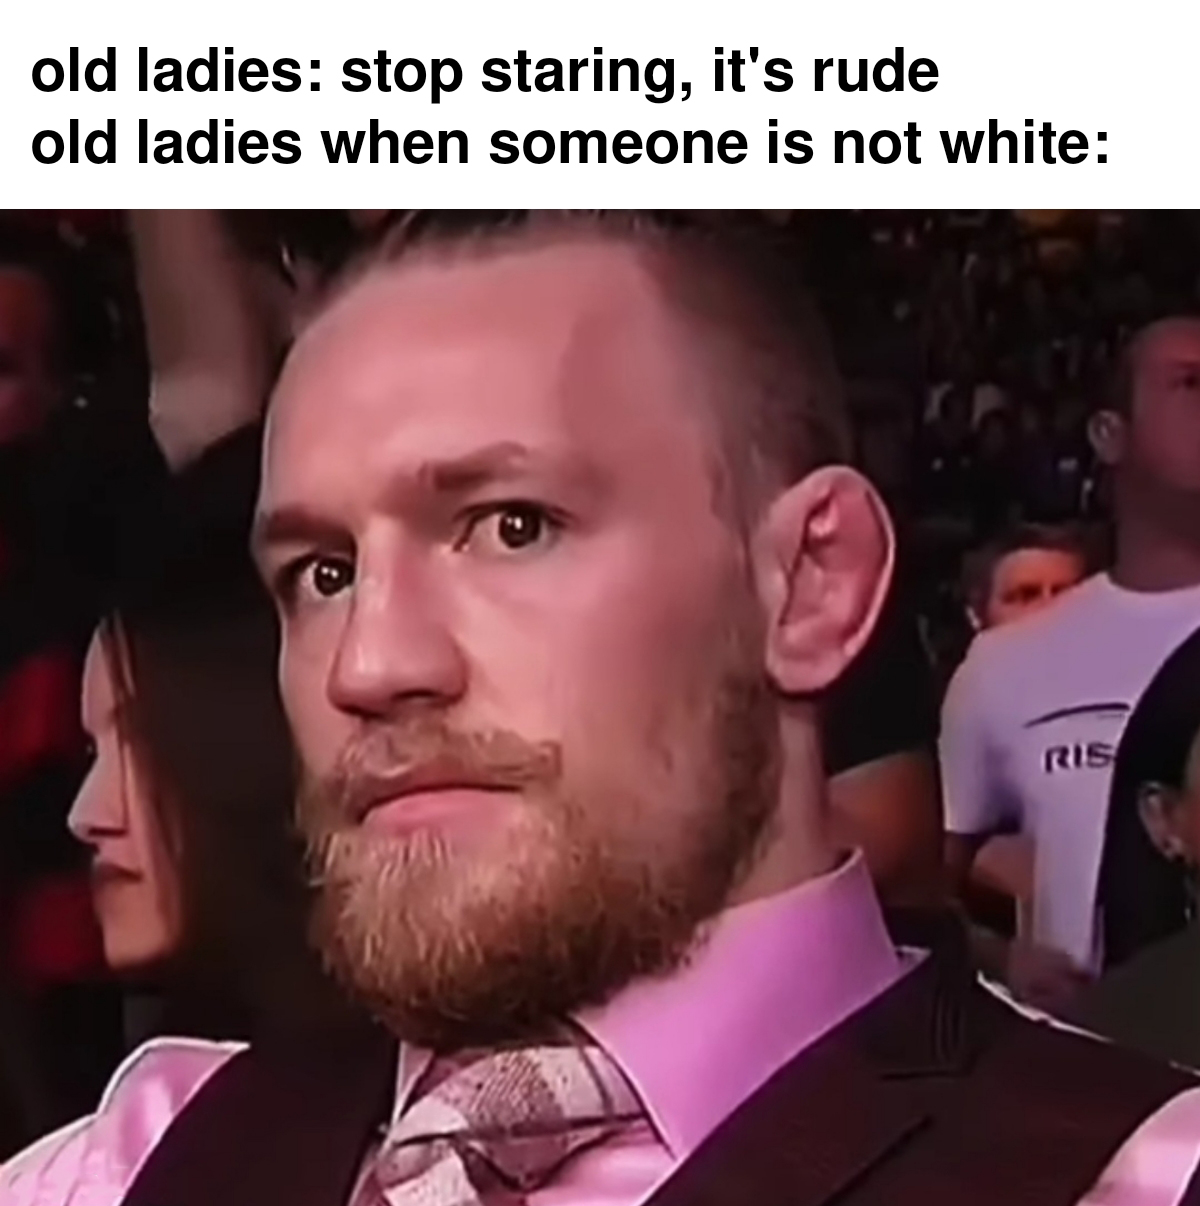 funny memes - dank memes - anti valentines day - old ladies stop staring, it's rude old ladies when someone is not white Ris